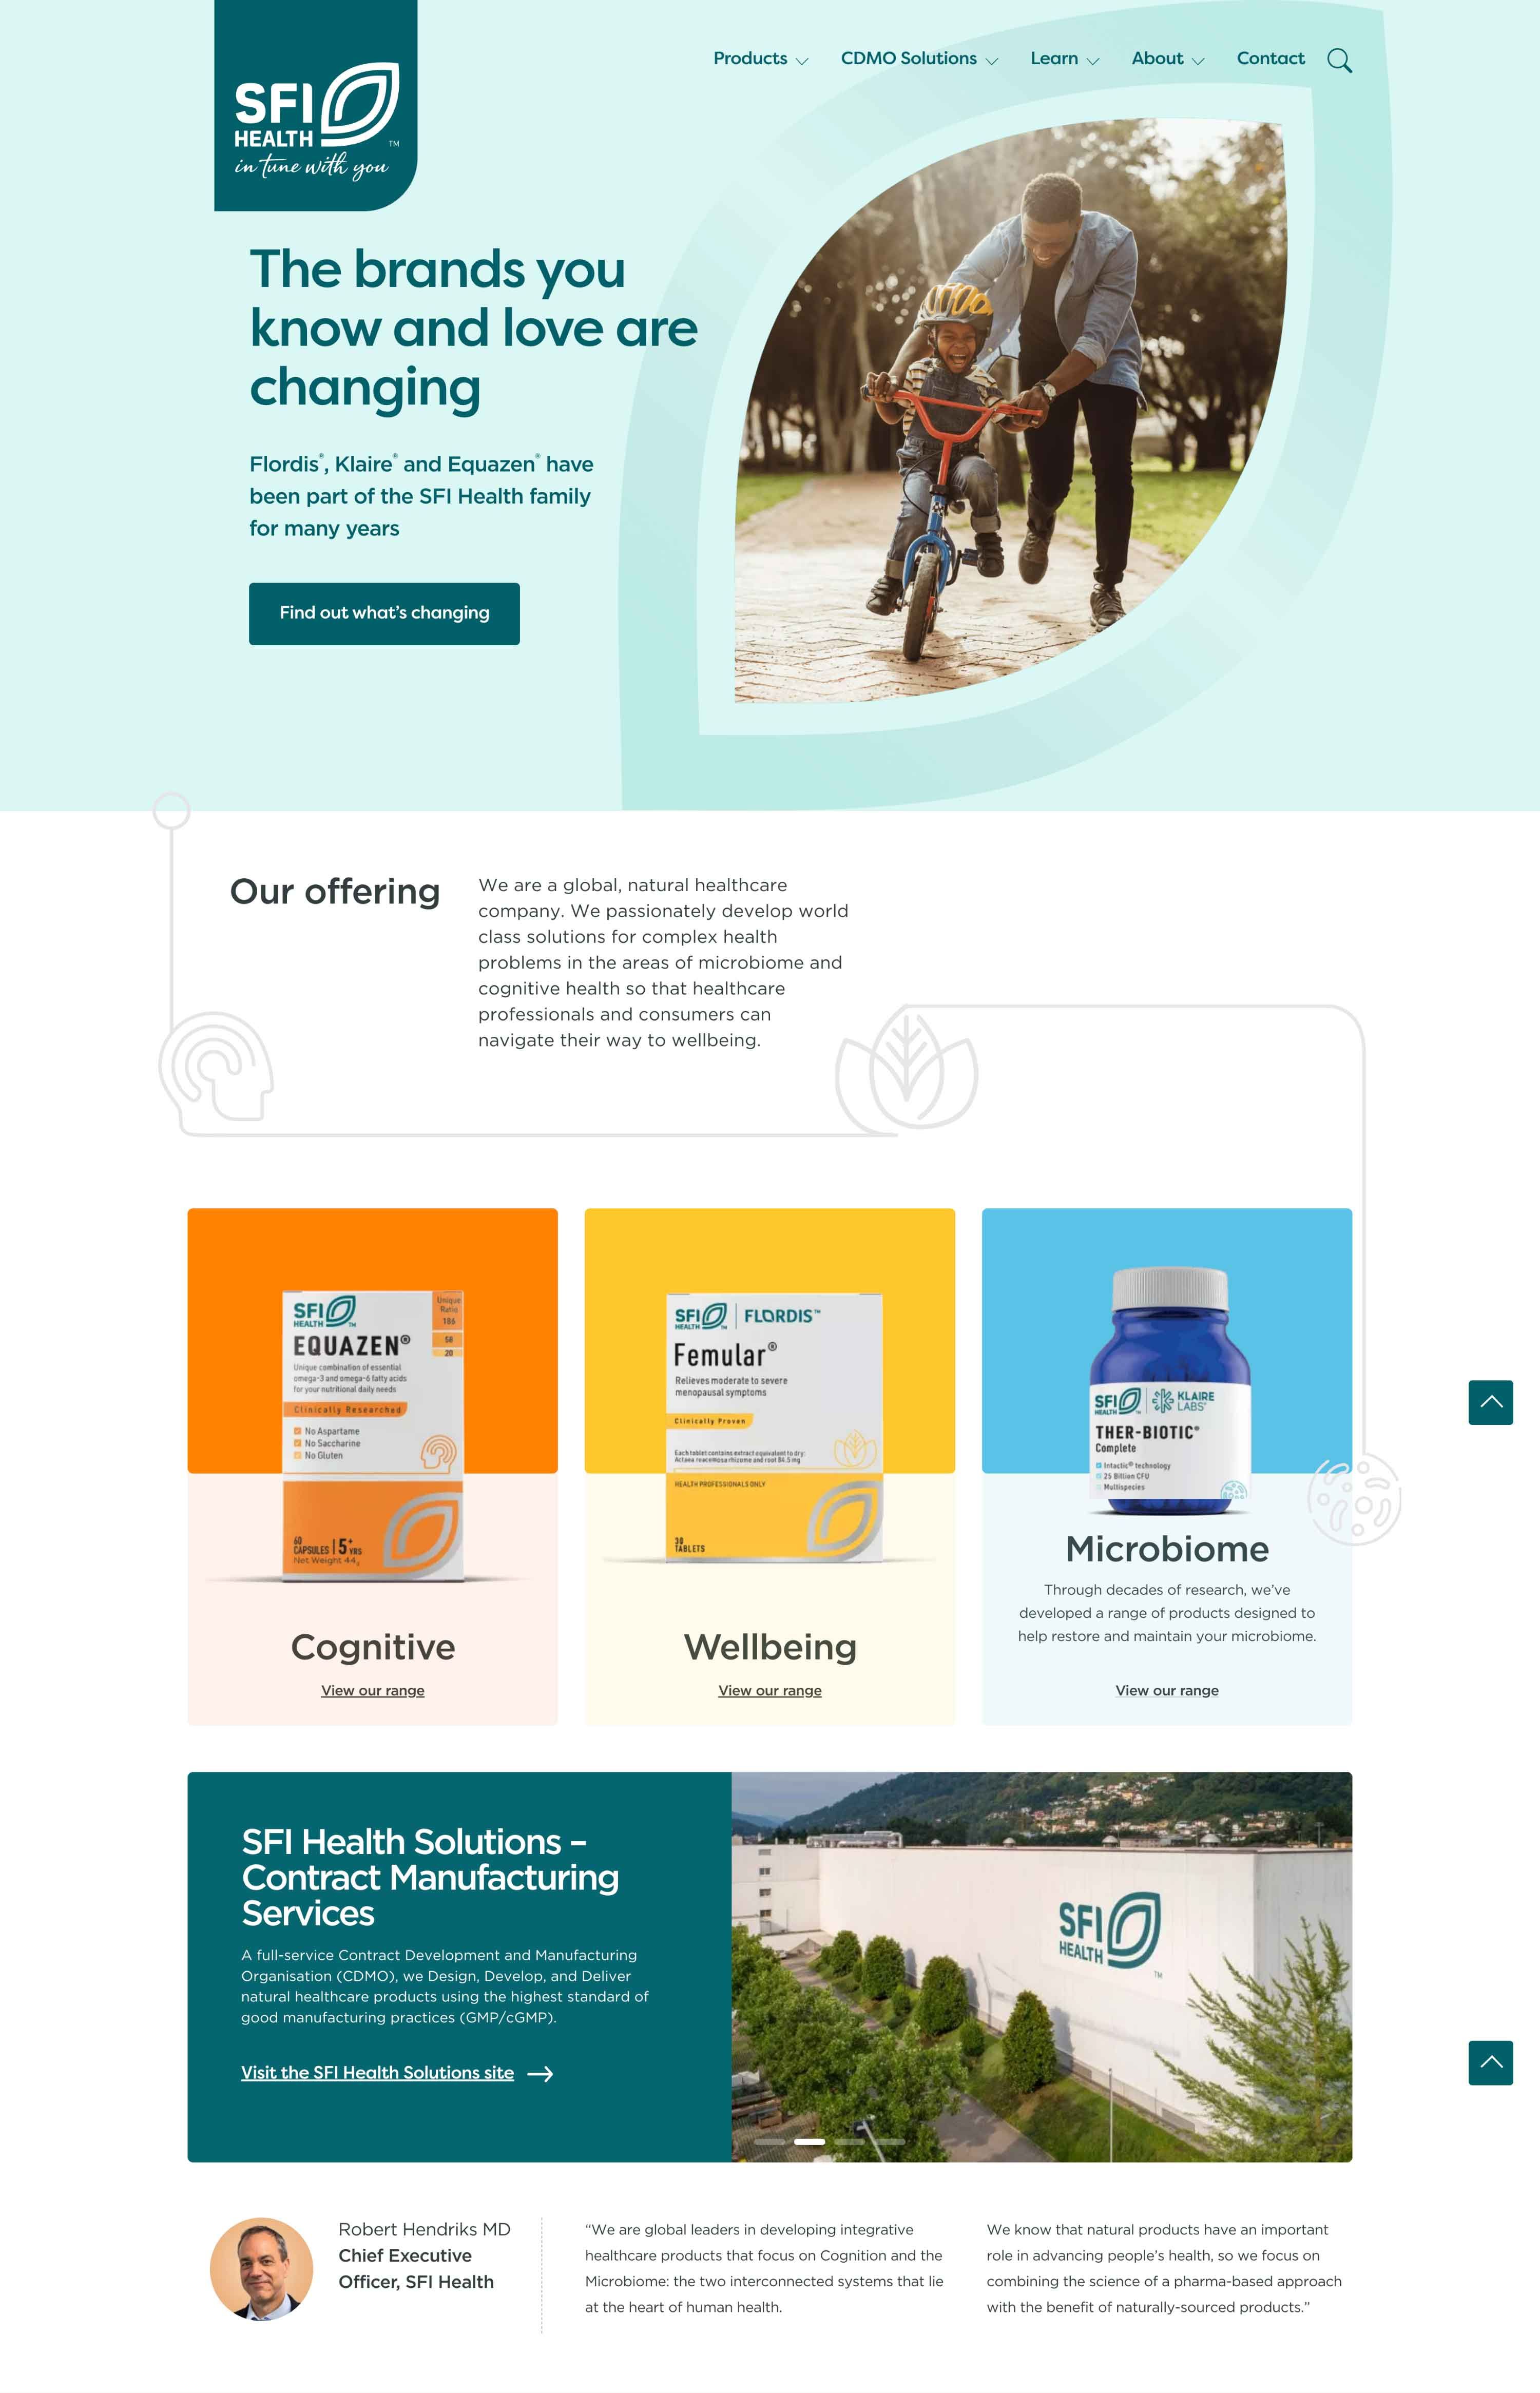 DDB Remedy: Designed the HCP Education section for the SFI Health Website